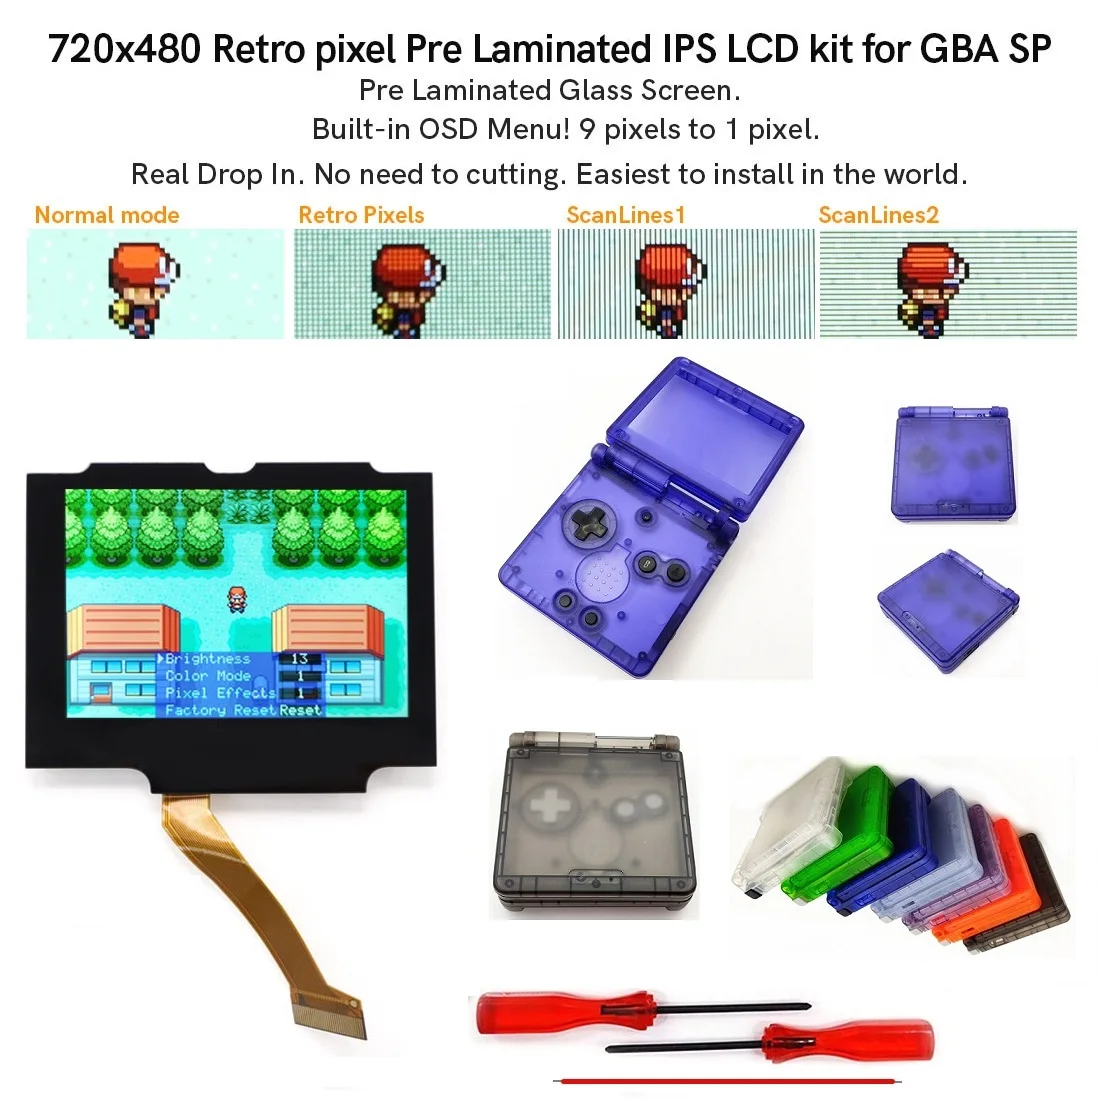 Drop In V5 720x480 Pre Laminated Retro Pixel IPS LCD For GBA SP Backlight LCD For Gameboy Advance SP With Clear Shell Case